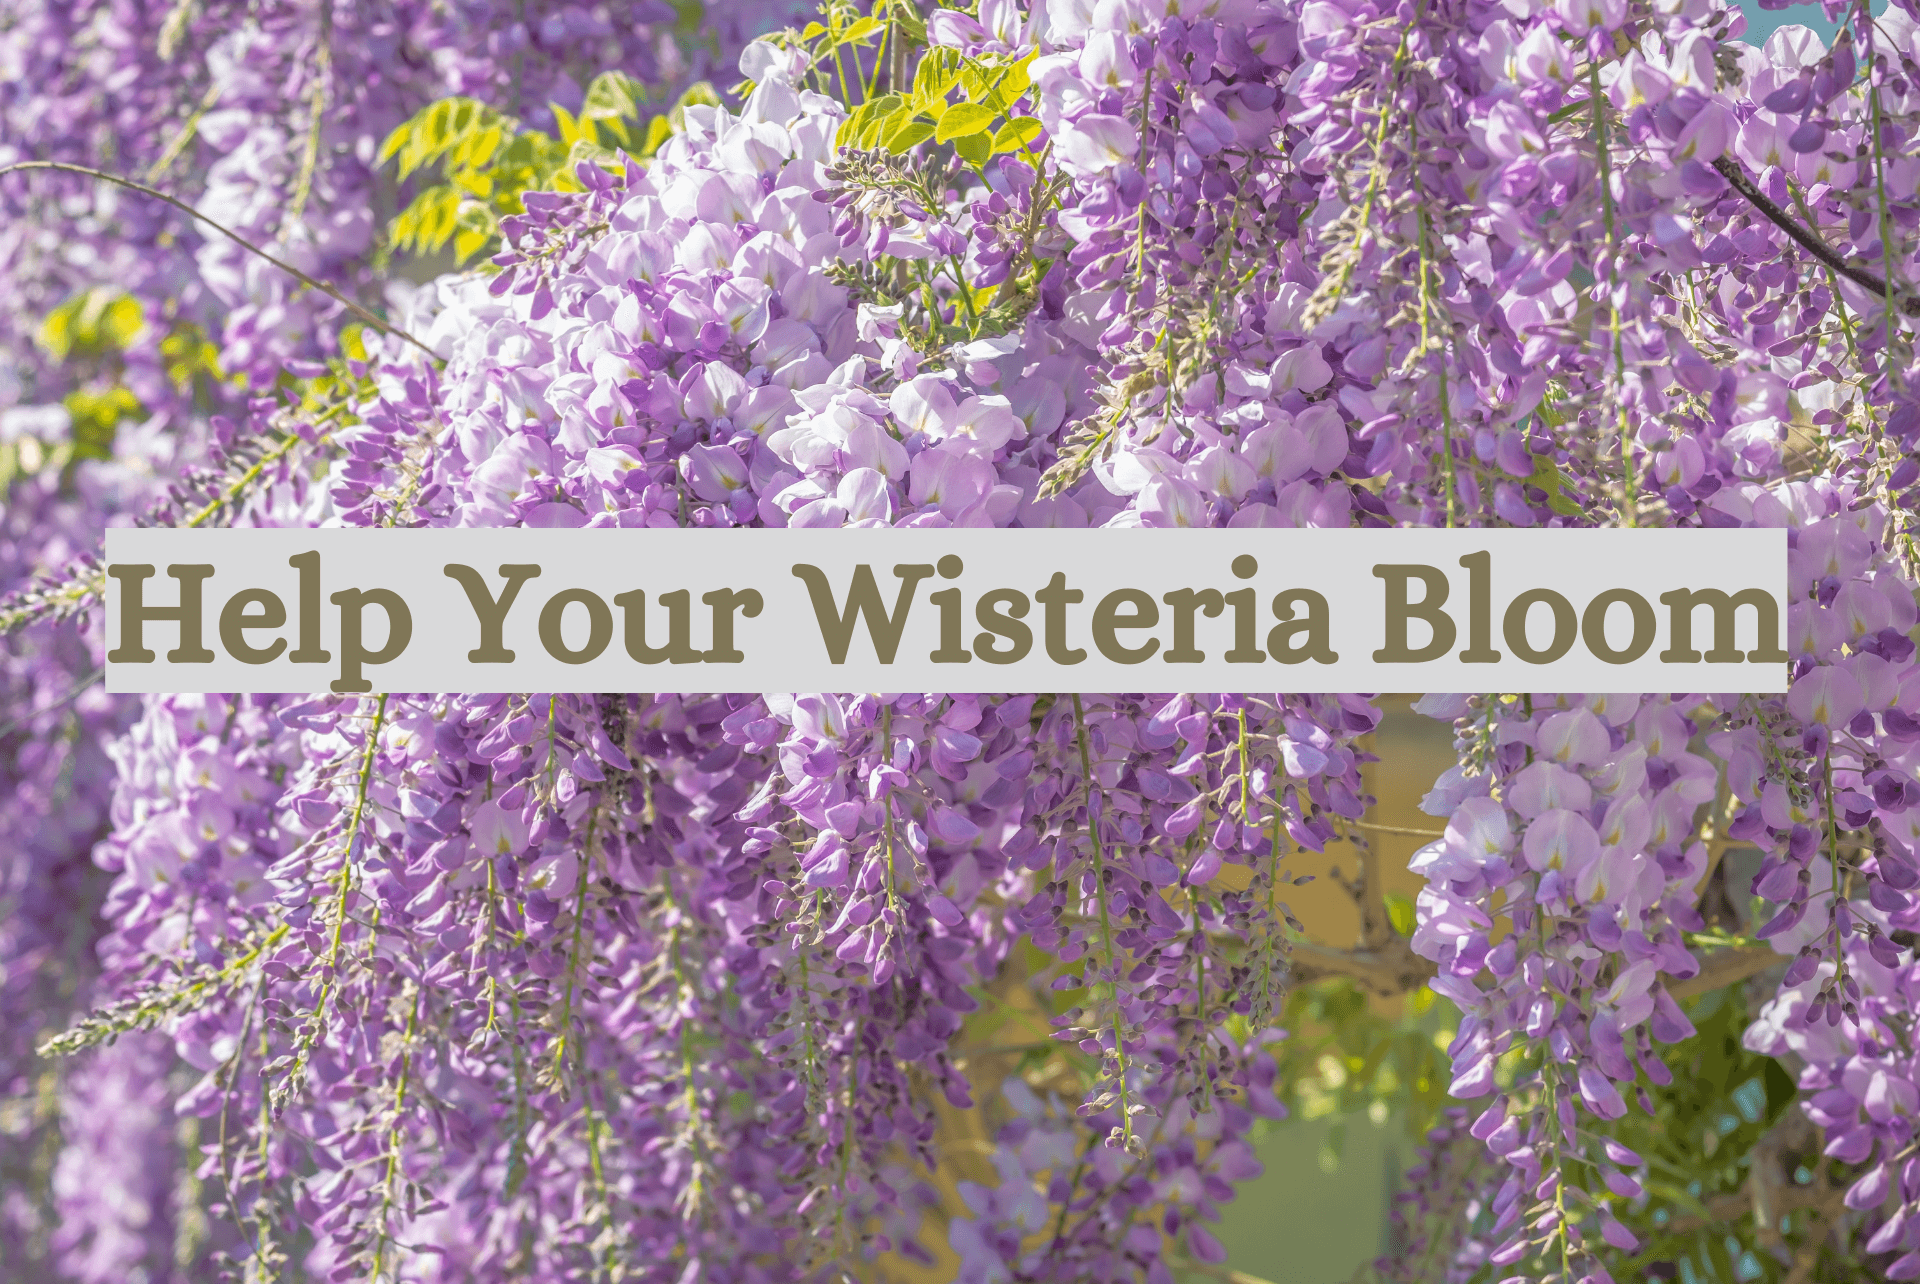 When Does Wisteria Bloom?